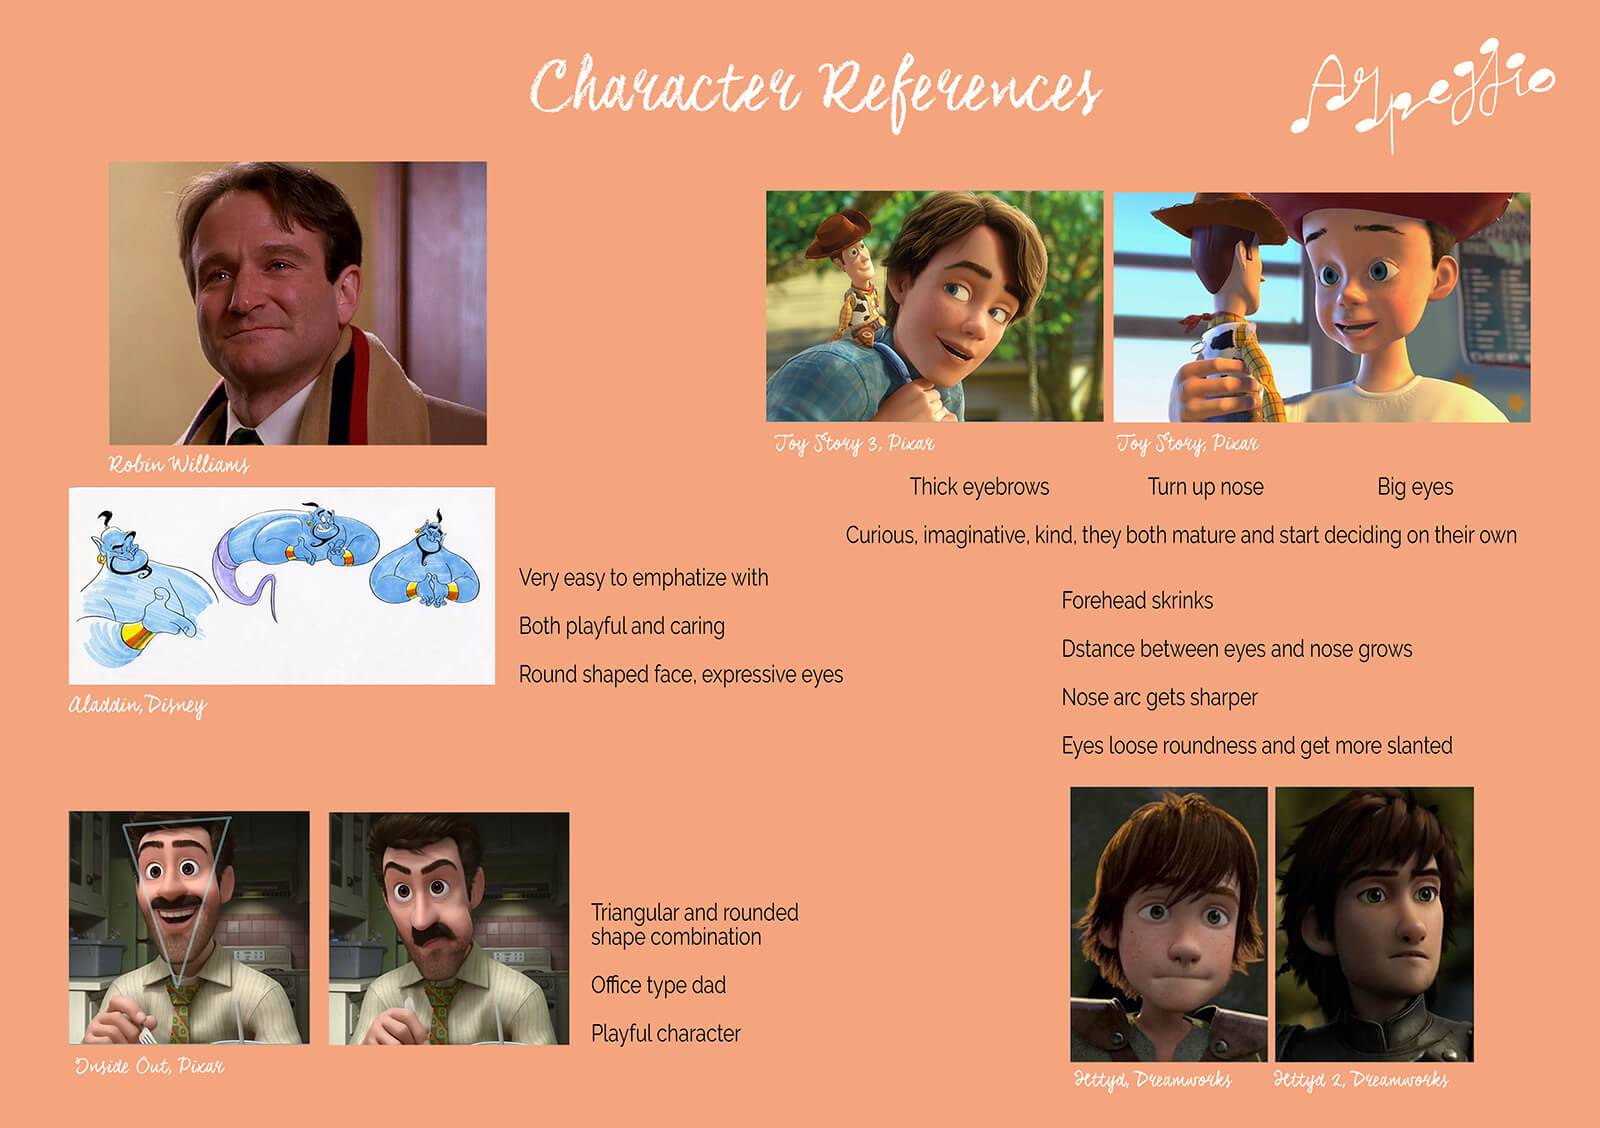 Character references for the film Arpeggio, including images from Aladdin, Inside Out, Toy Story, How to Train Your Dragon